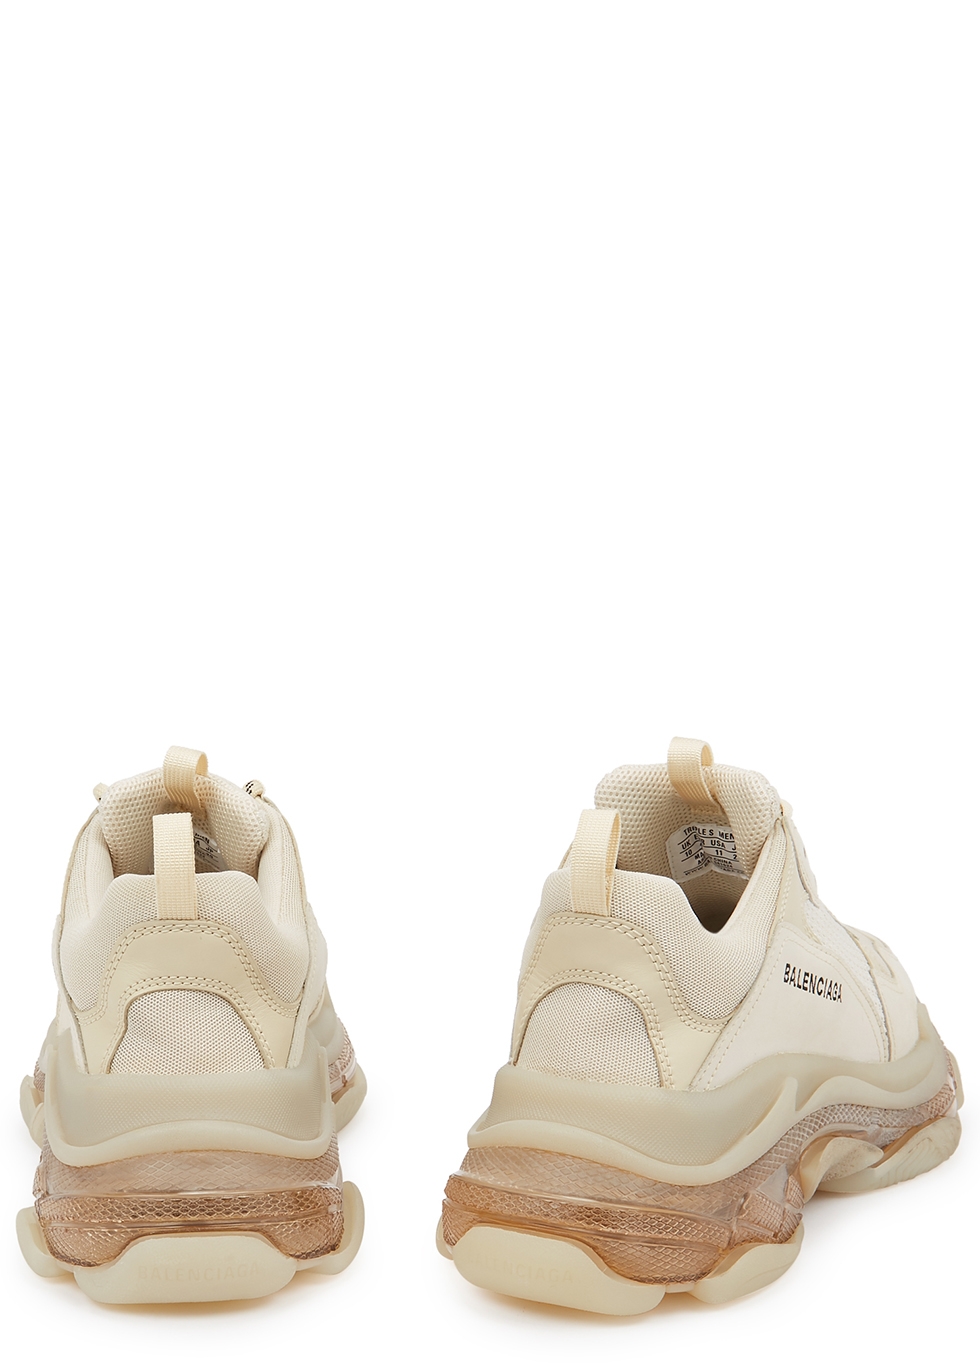 How to get cheap Balenciaga Triple S Trainers Navy Gray at